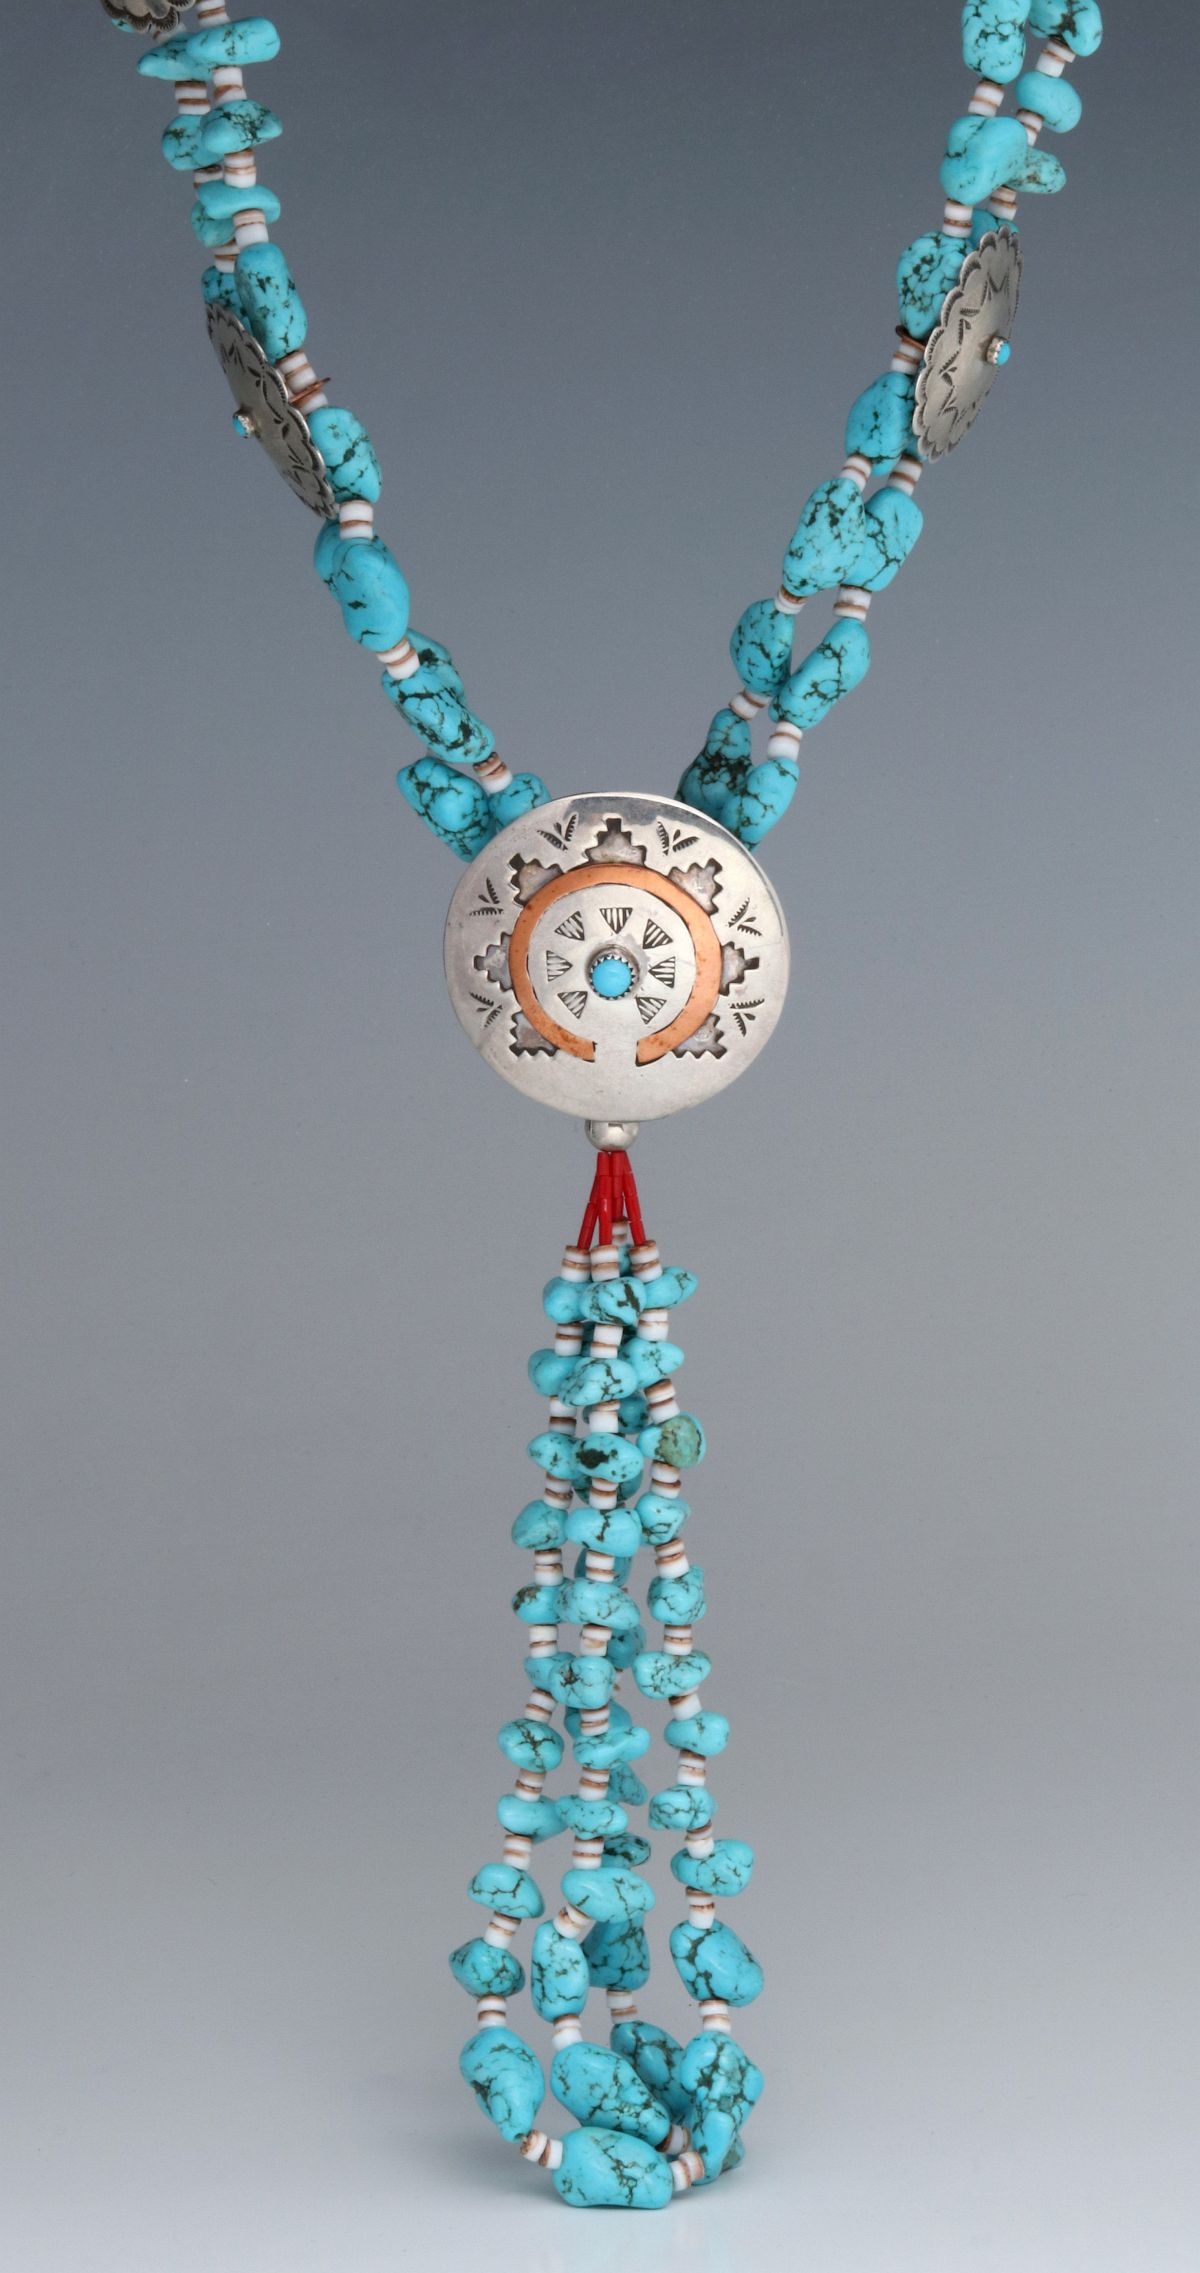 A NATIVE AMERICAN WEDDING BASKET TURQUOISE NECKLACE